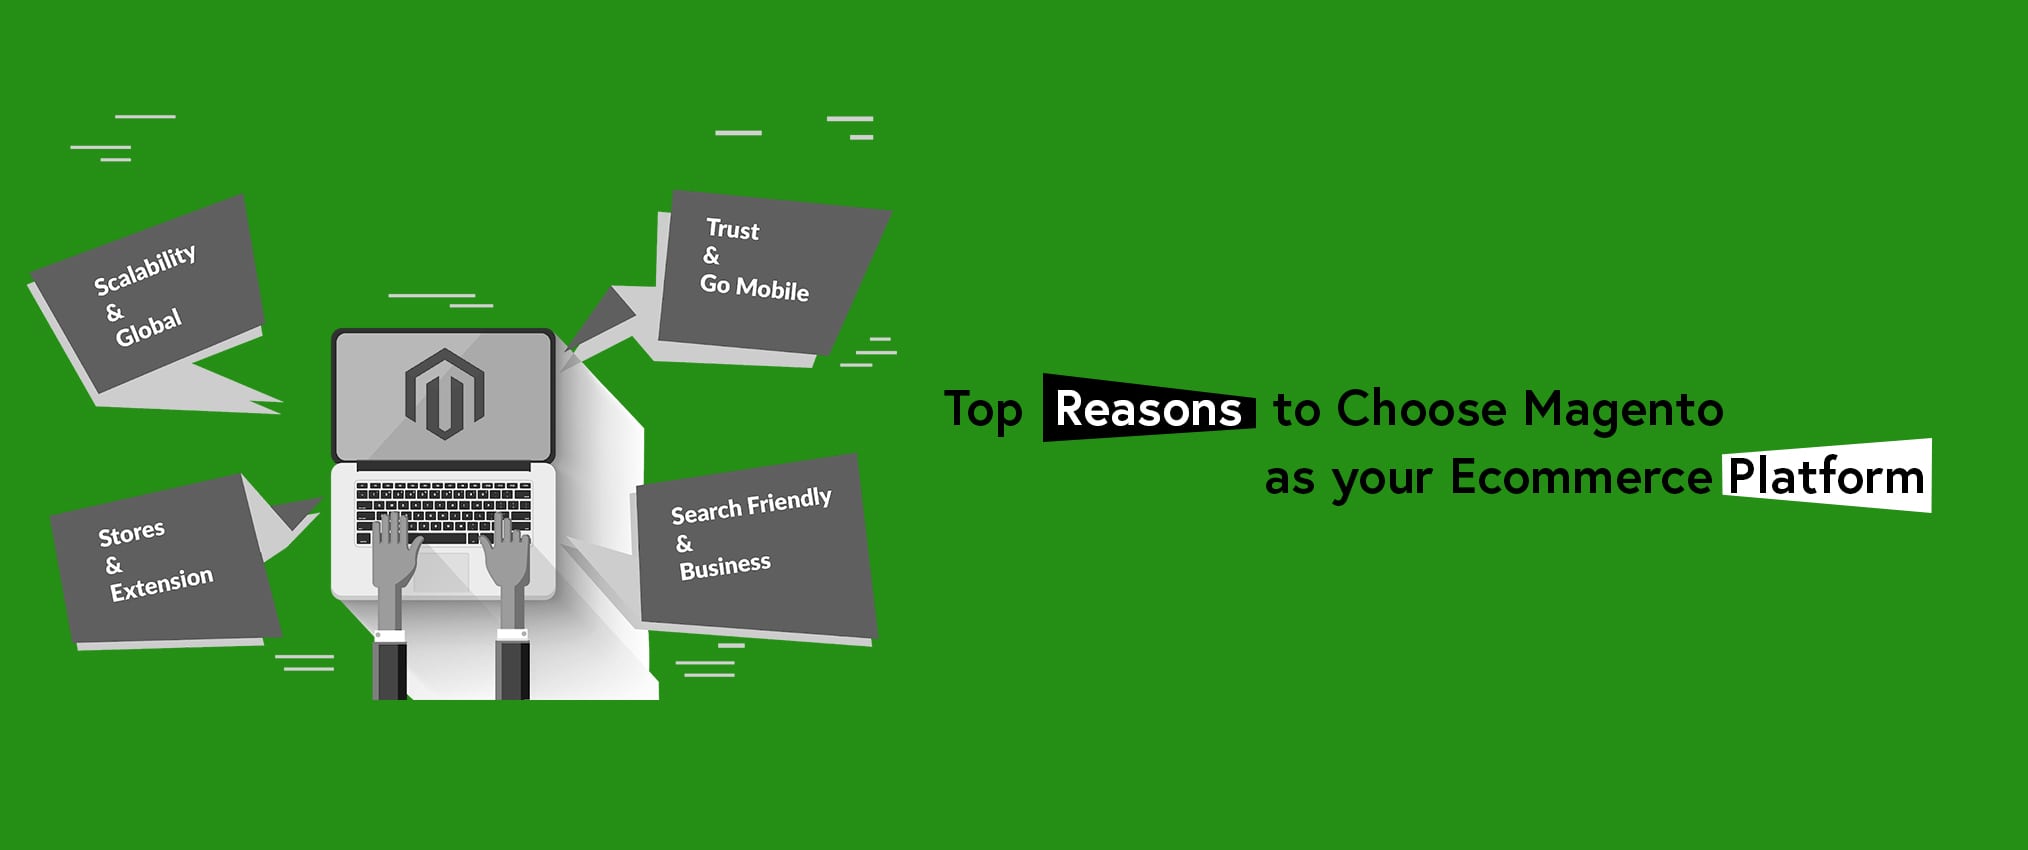 Top Reasons to Choose Magento as your Ecommerce Platform